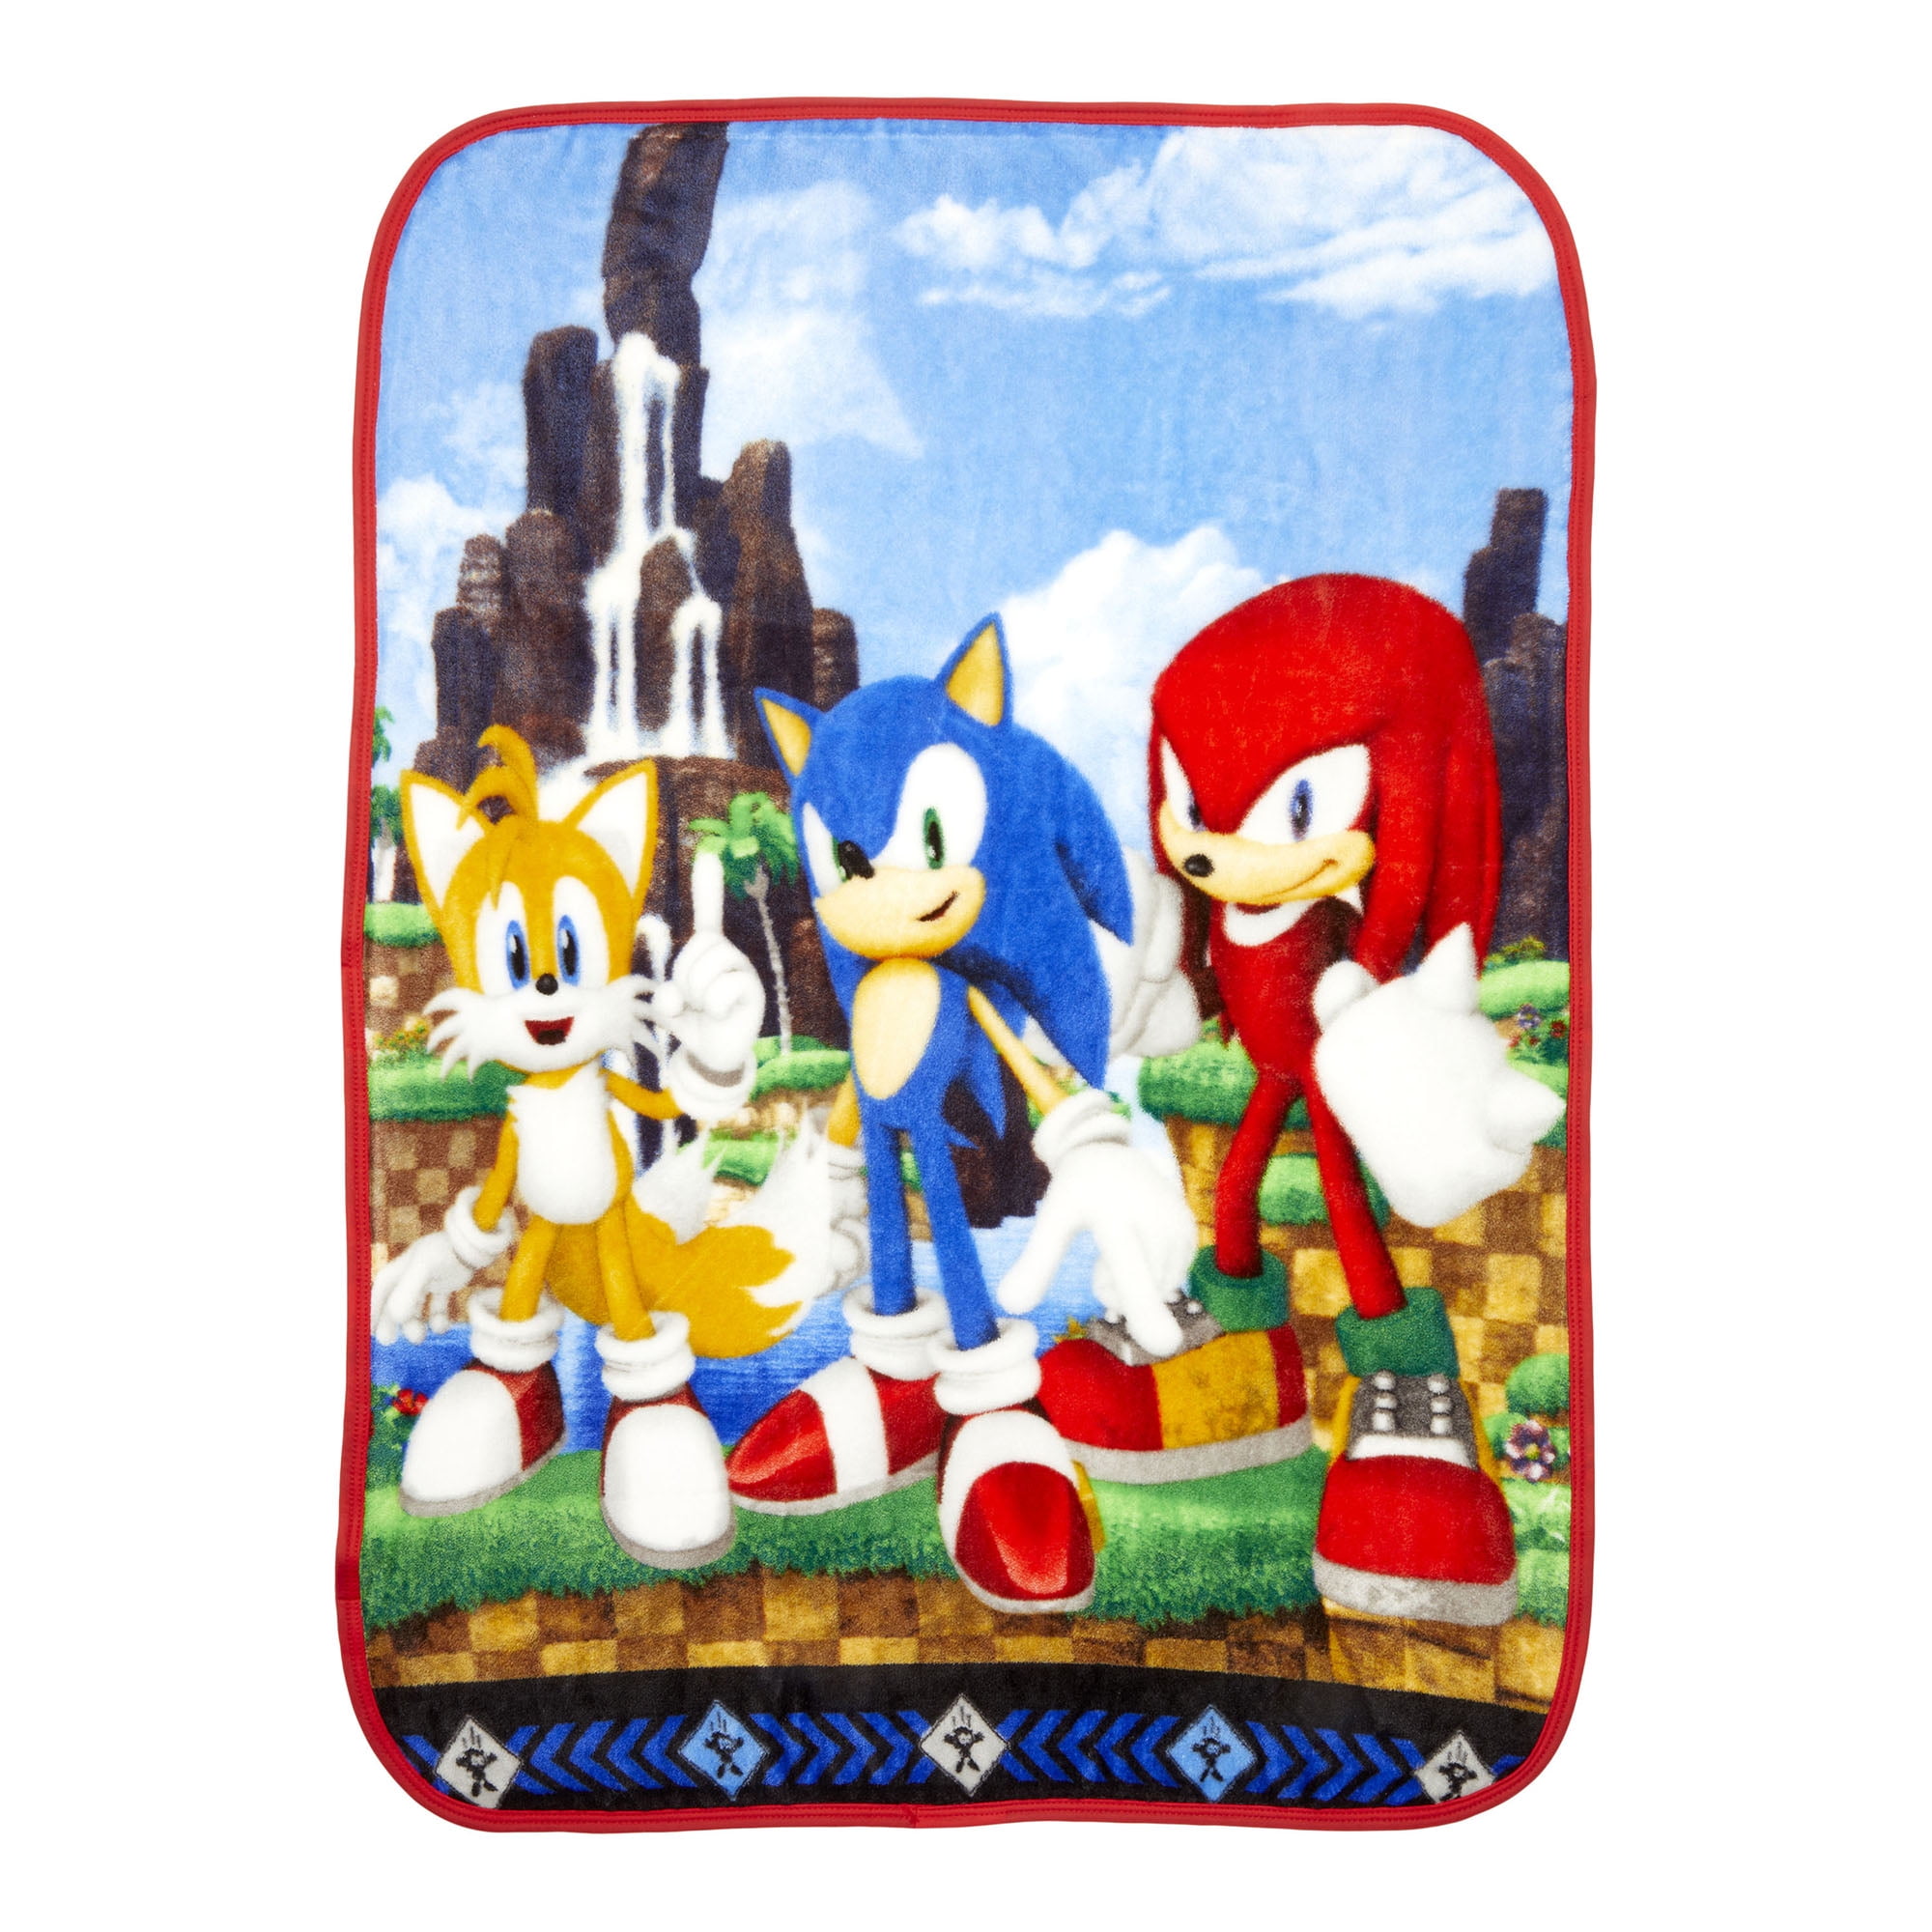 New Sonic the Hedgehog and Tails Fleece Throw Gift Blanket Sega Video Game SOFT 